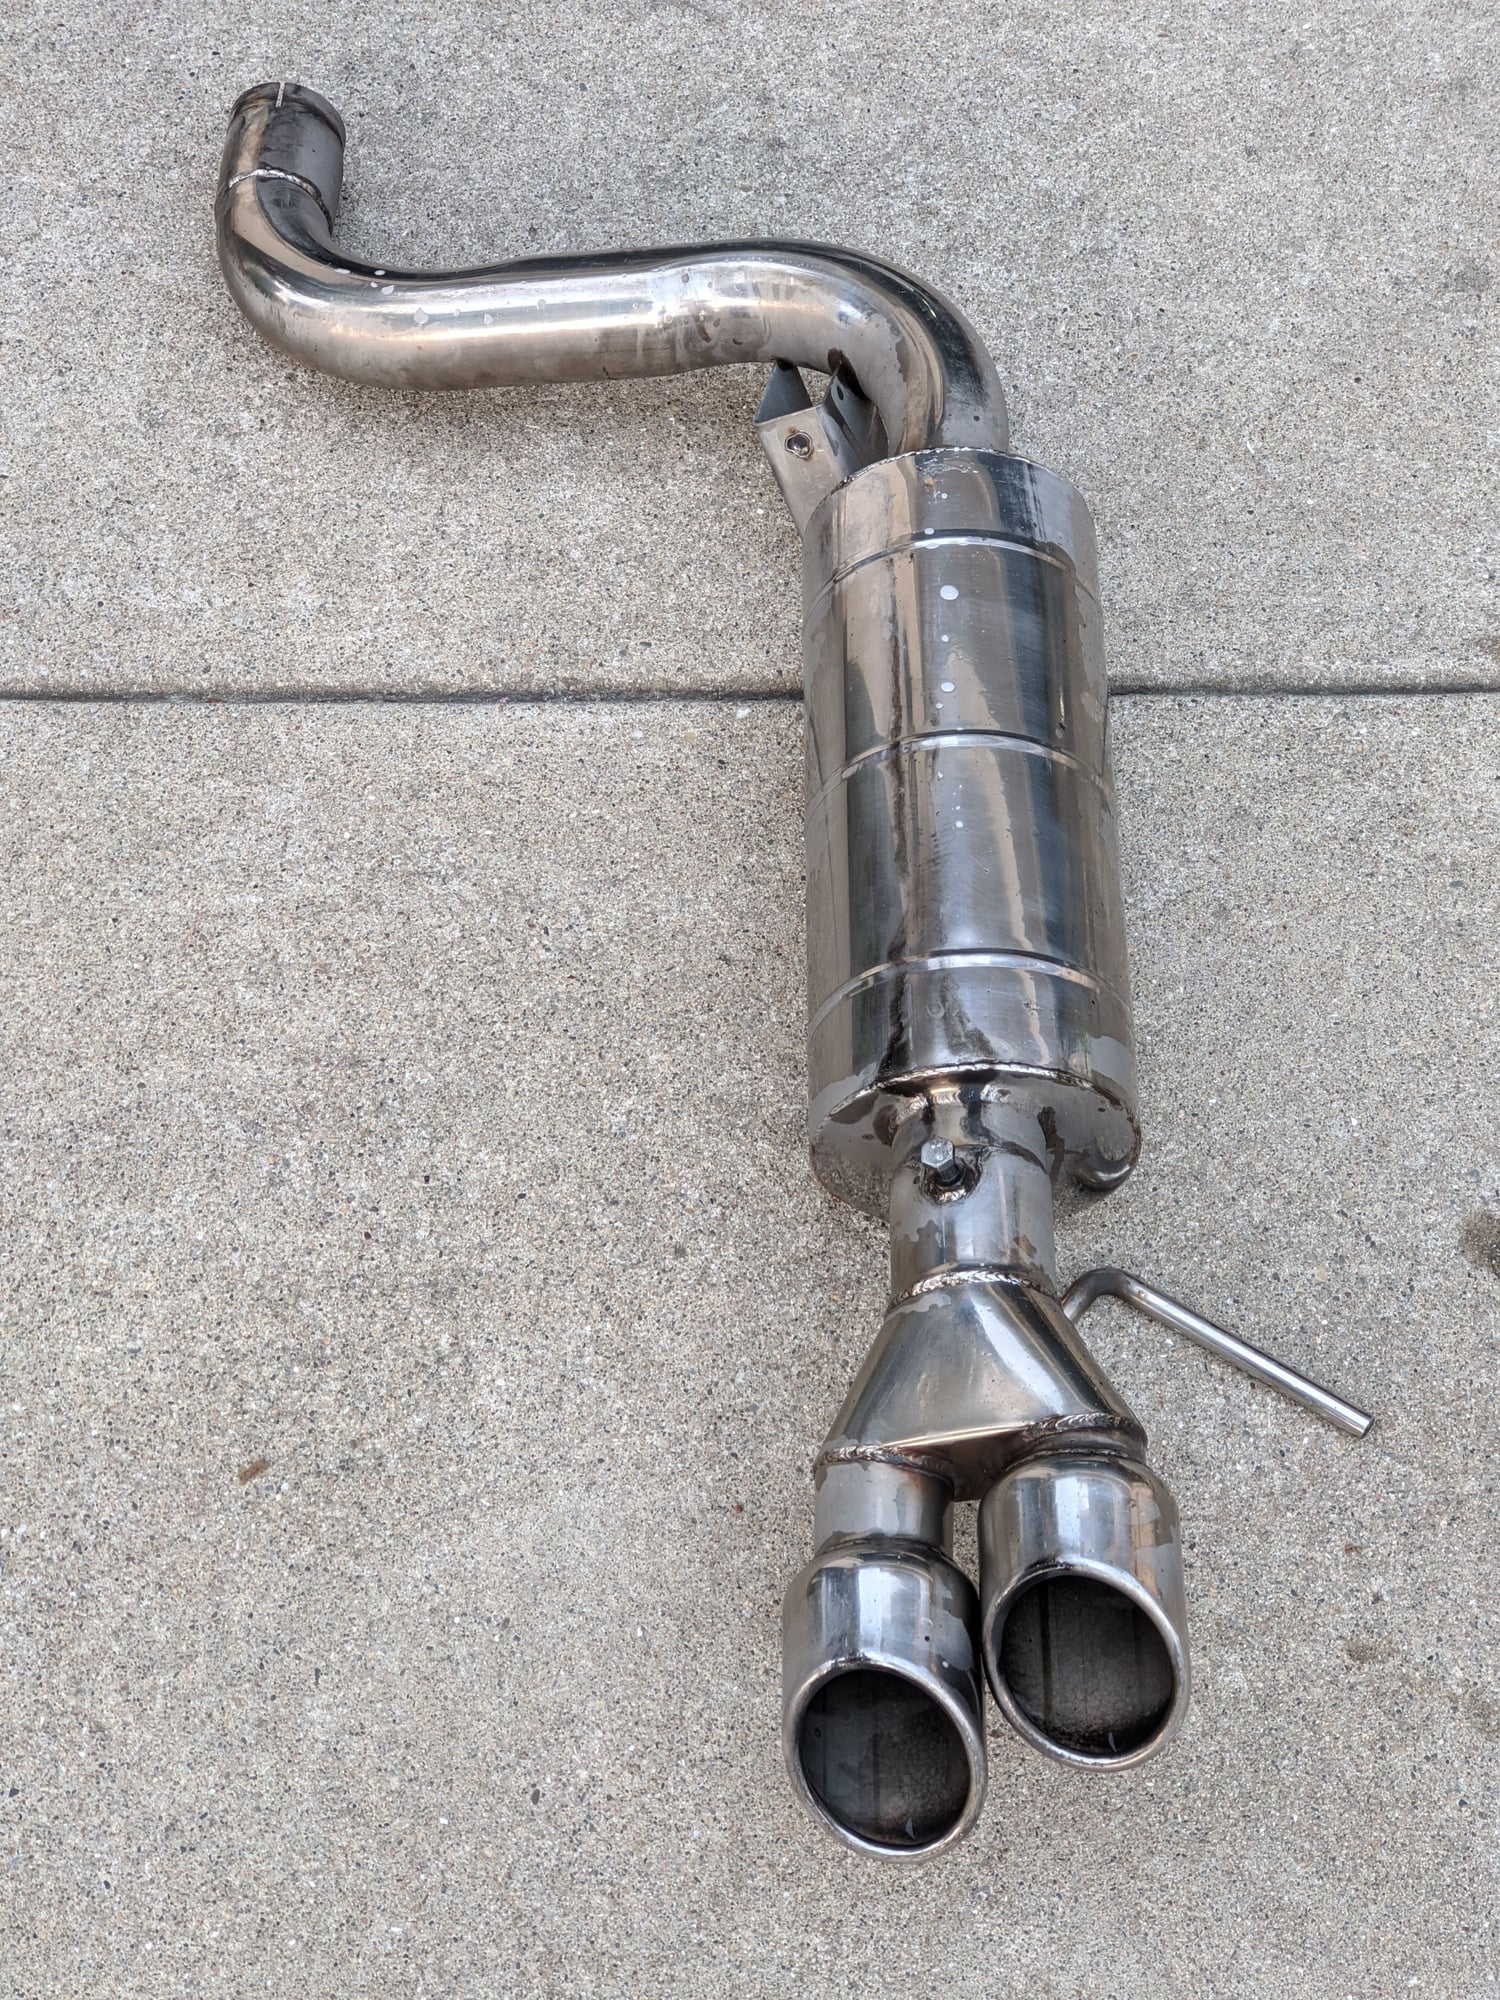 Engine - Exhaust - Elite RR Axleback Exhaust (from the UK) for XF, XFR, XFR-S - Used - 2009 to 2015 Jaguar XF - 2009 to 2015 Jaguar XFR - 2009 to 2015 Jaguar XFR-S - Bay Area, CA 95035, United States